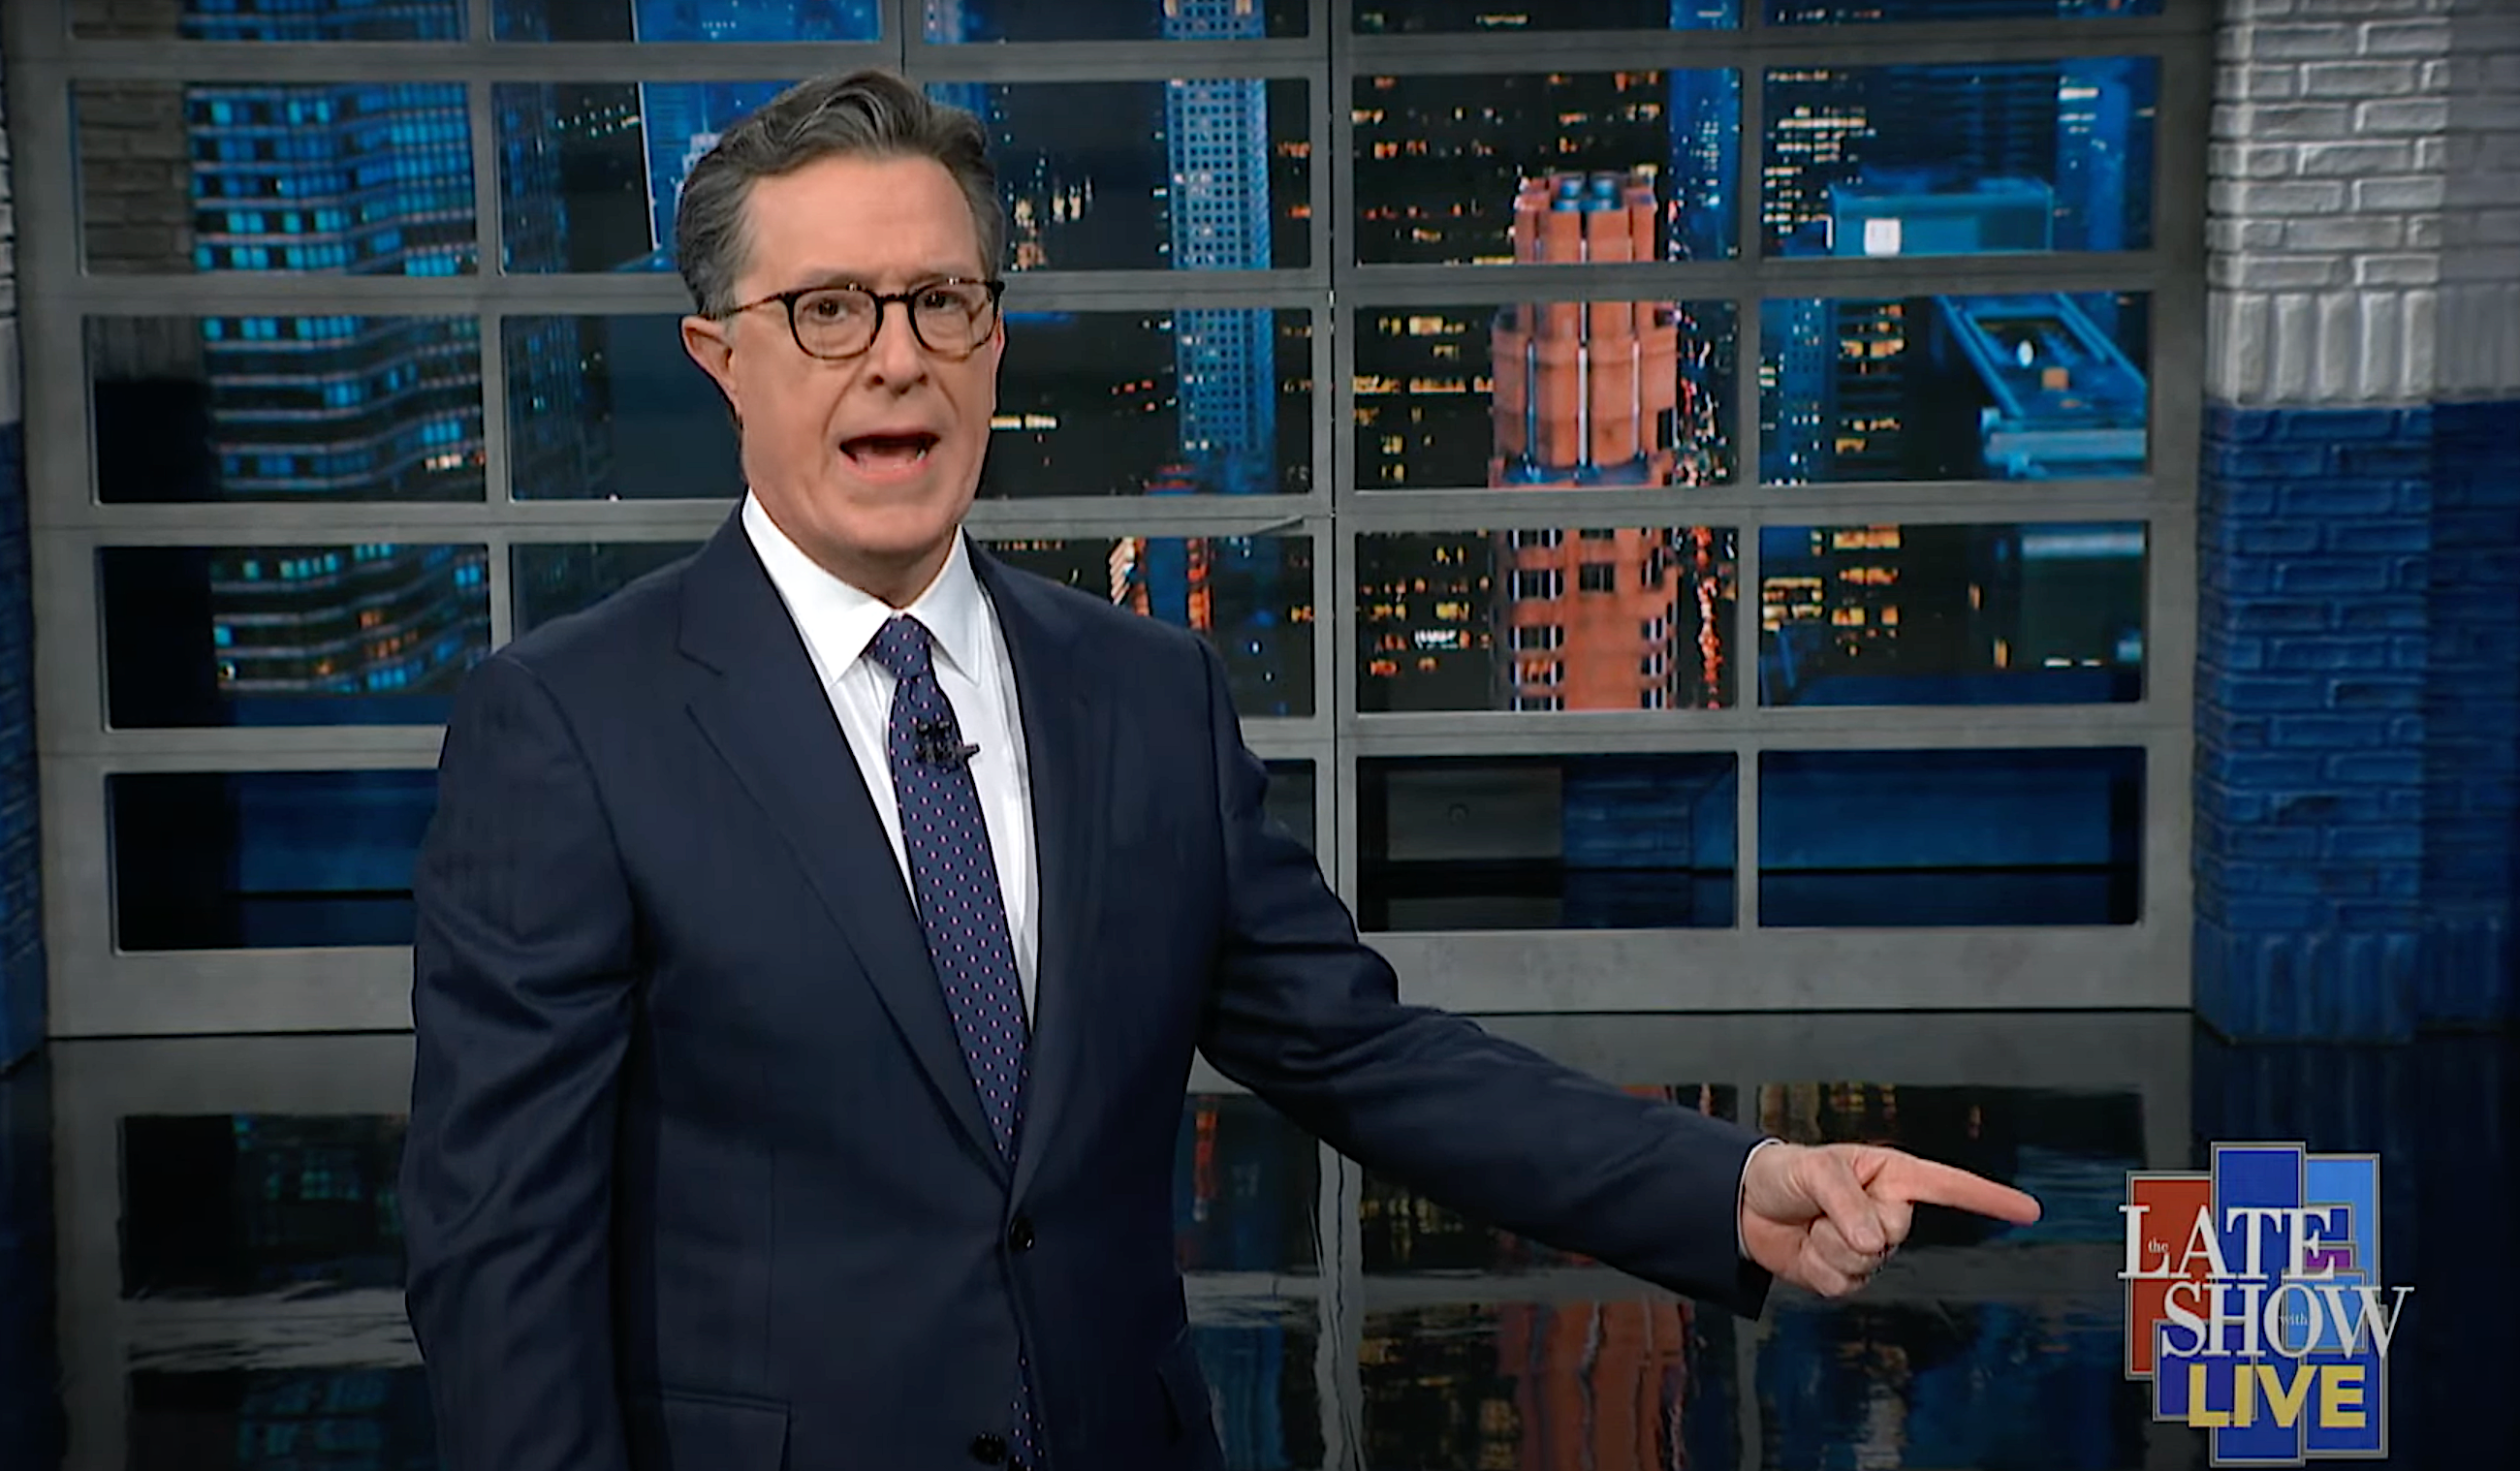 Stephen Colbert goes live to recap Biden’s first State of the Union